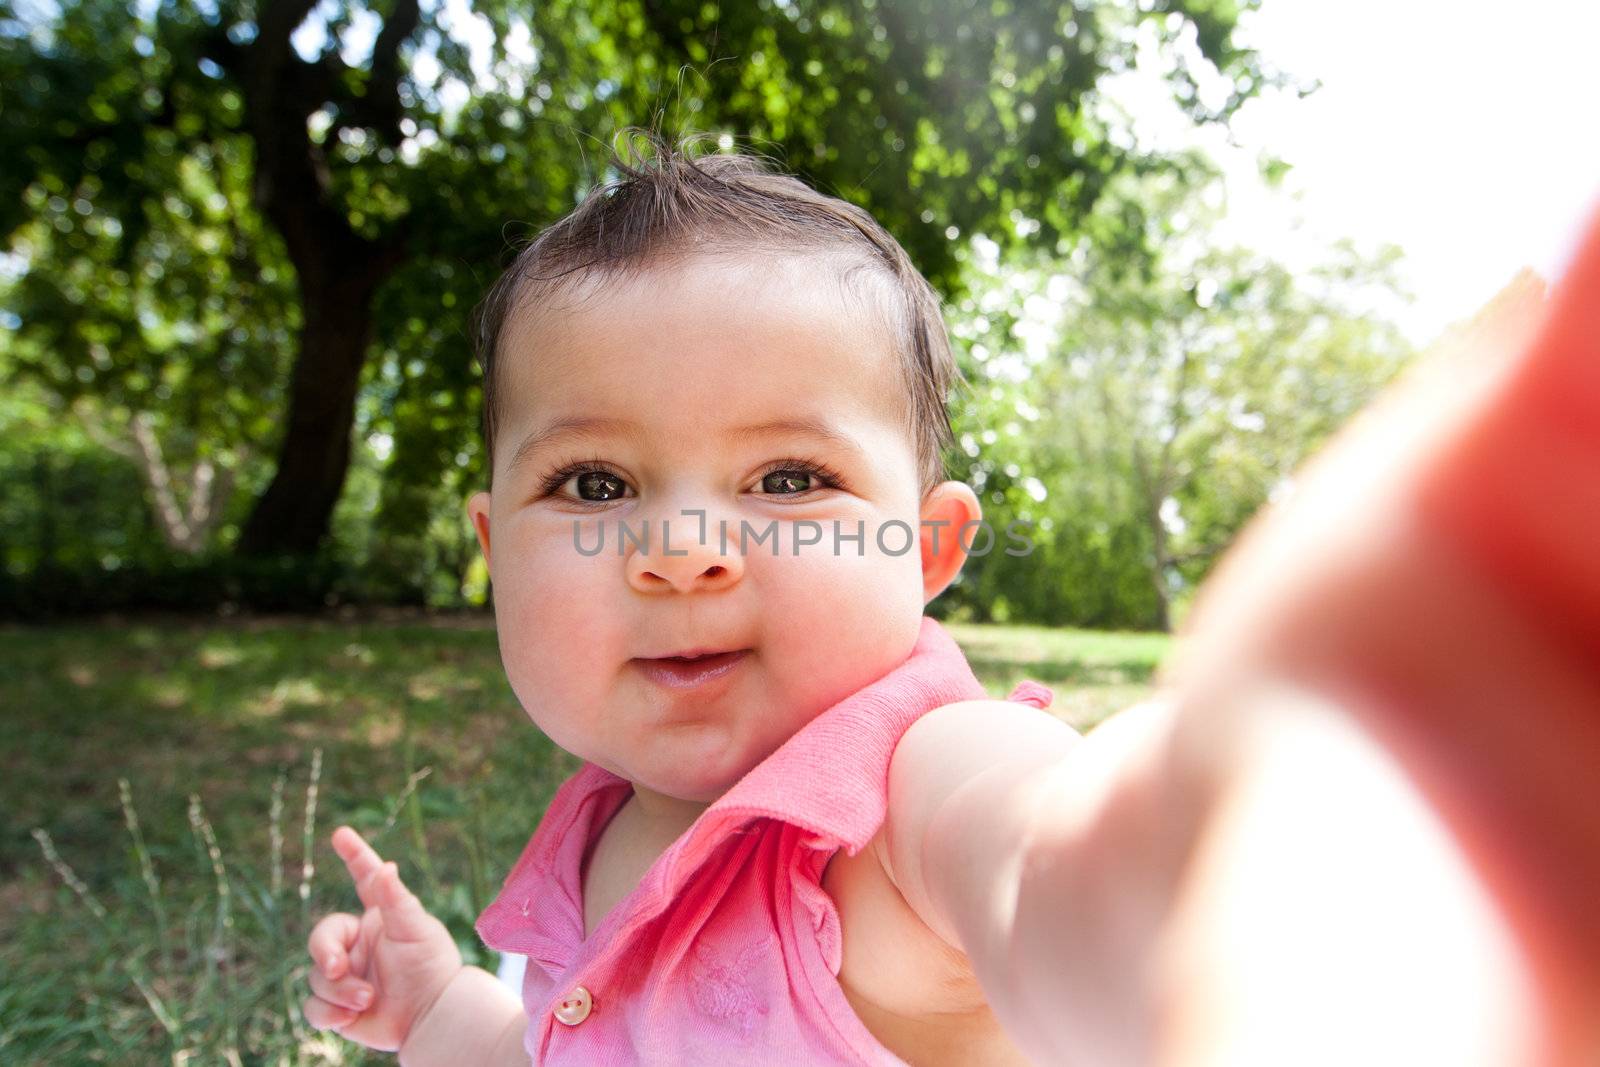 Cute funny happy baby infant sticking arm out as if she's taking self portrait photo in a park.